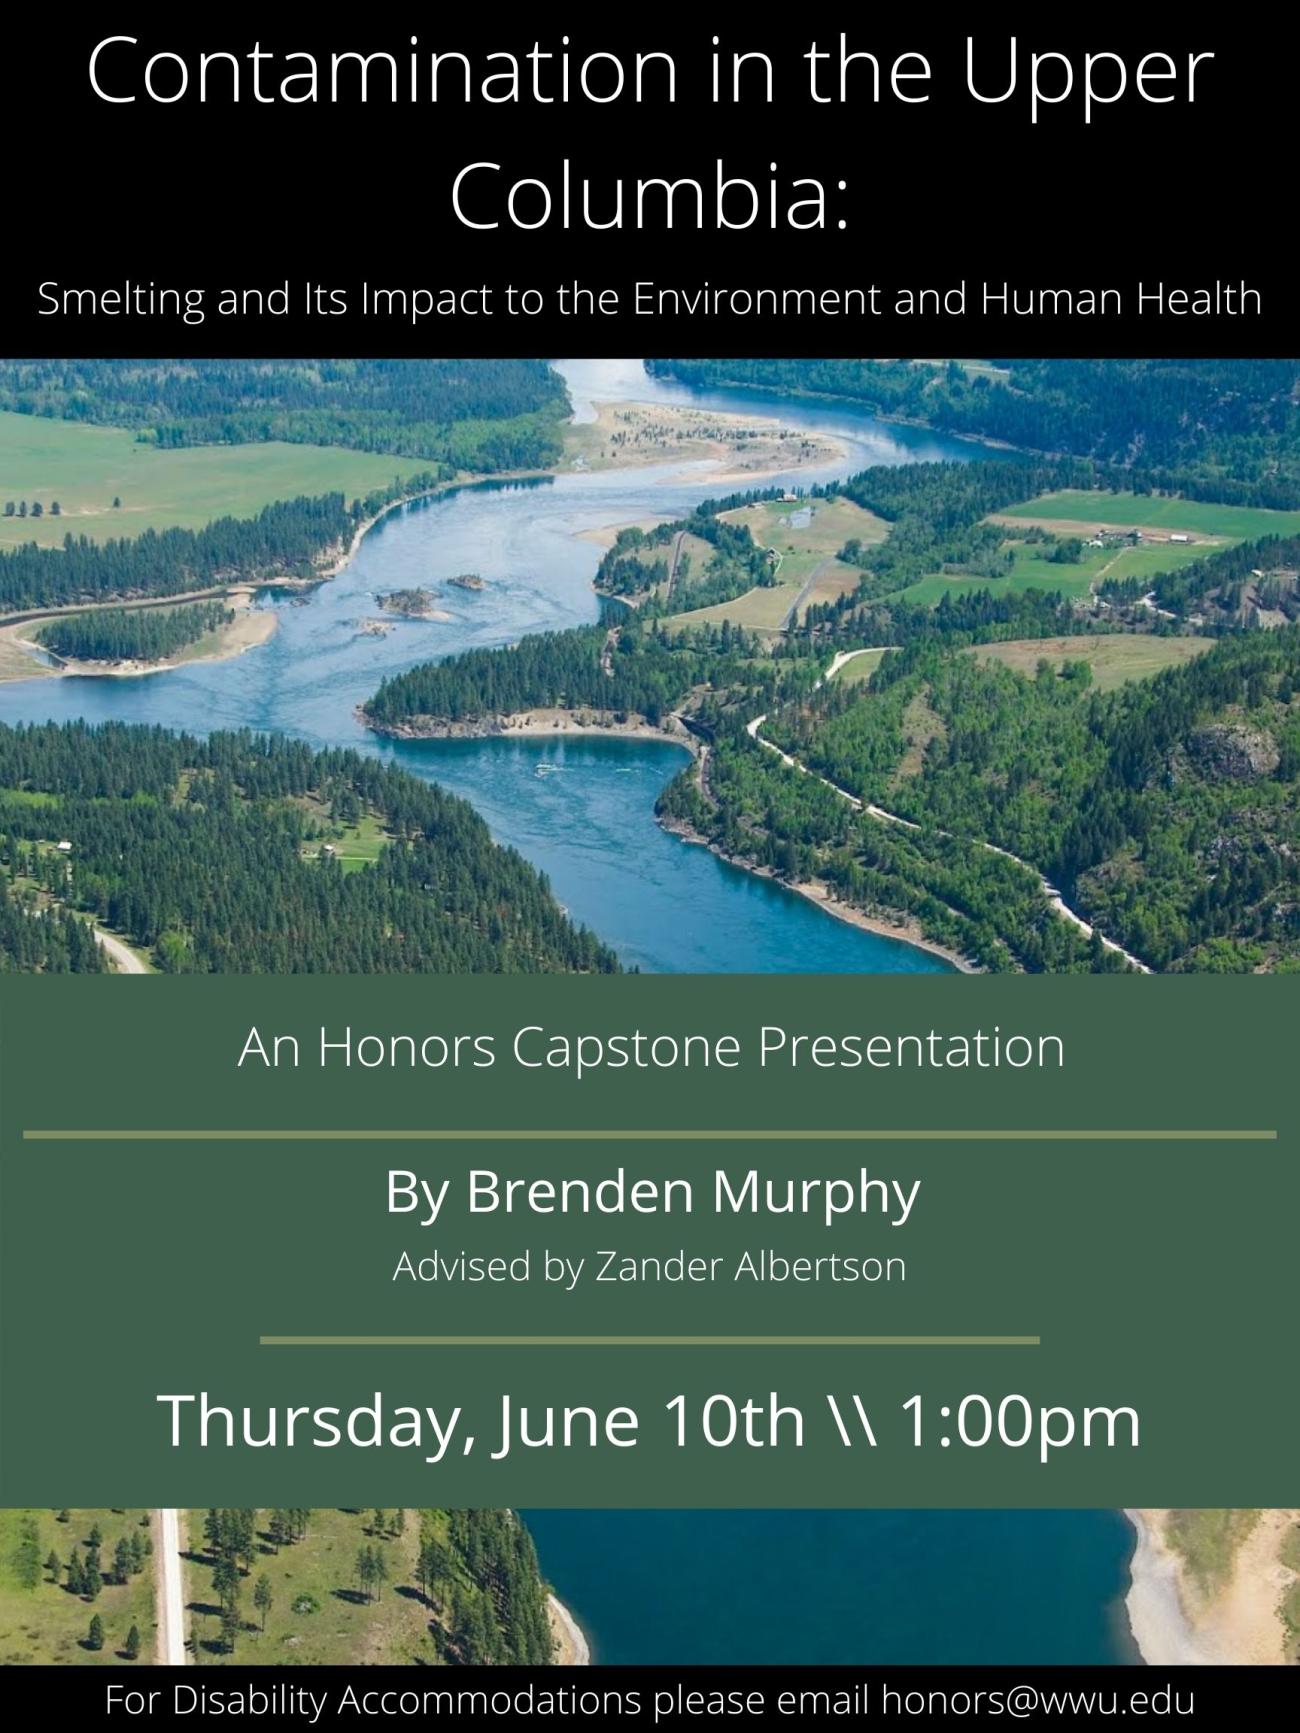 Overhead photo of a bend in the Columbia River surrounded by evergreen trees. Text reads: "Contamination in the Upper Columbia: Smelting and Its Impact to the Environment and Human Health. An honors capstone presentation by Brenden Murphy, advised by Zander Albertson. Thursday, June 10th at 1 pm. For disability accommodations please email honors@wwu.edu". 